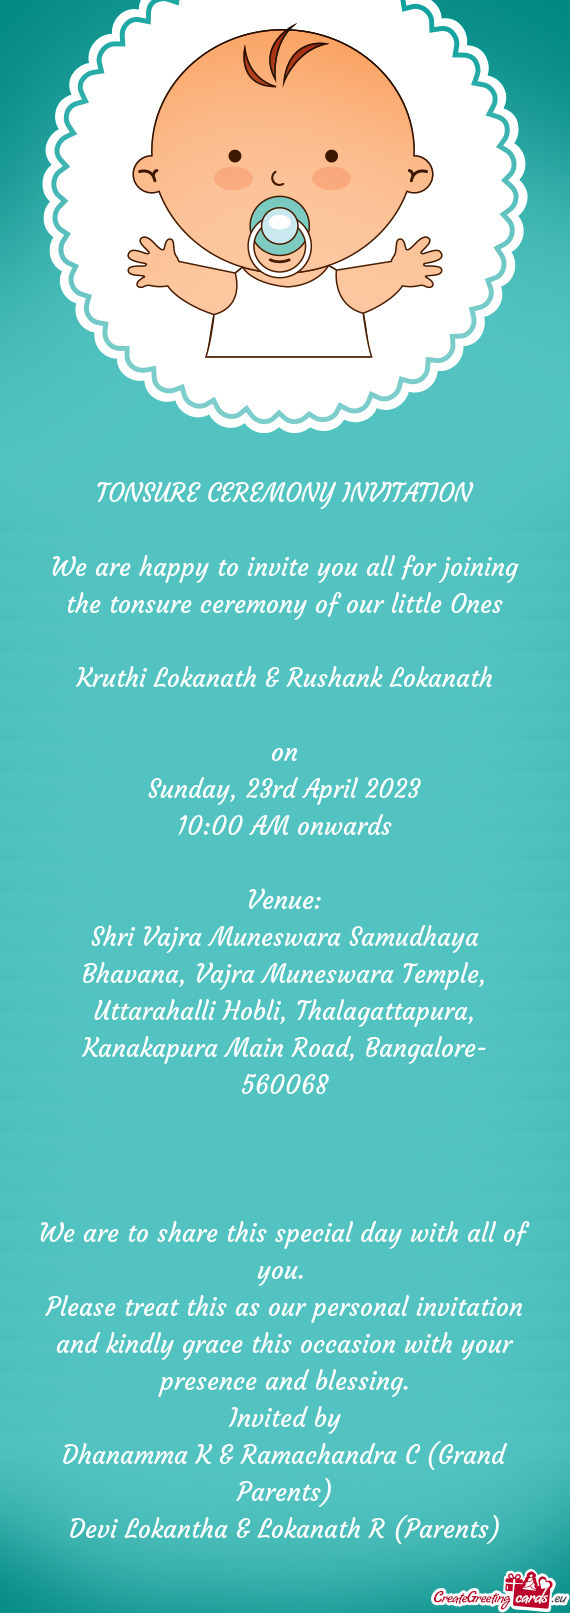 We are happy to invite you all for joining the tonsure ceremony of our little Ones